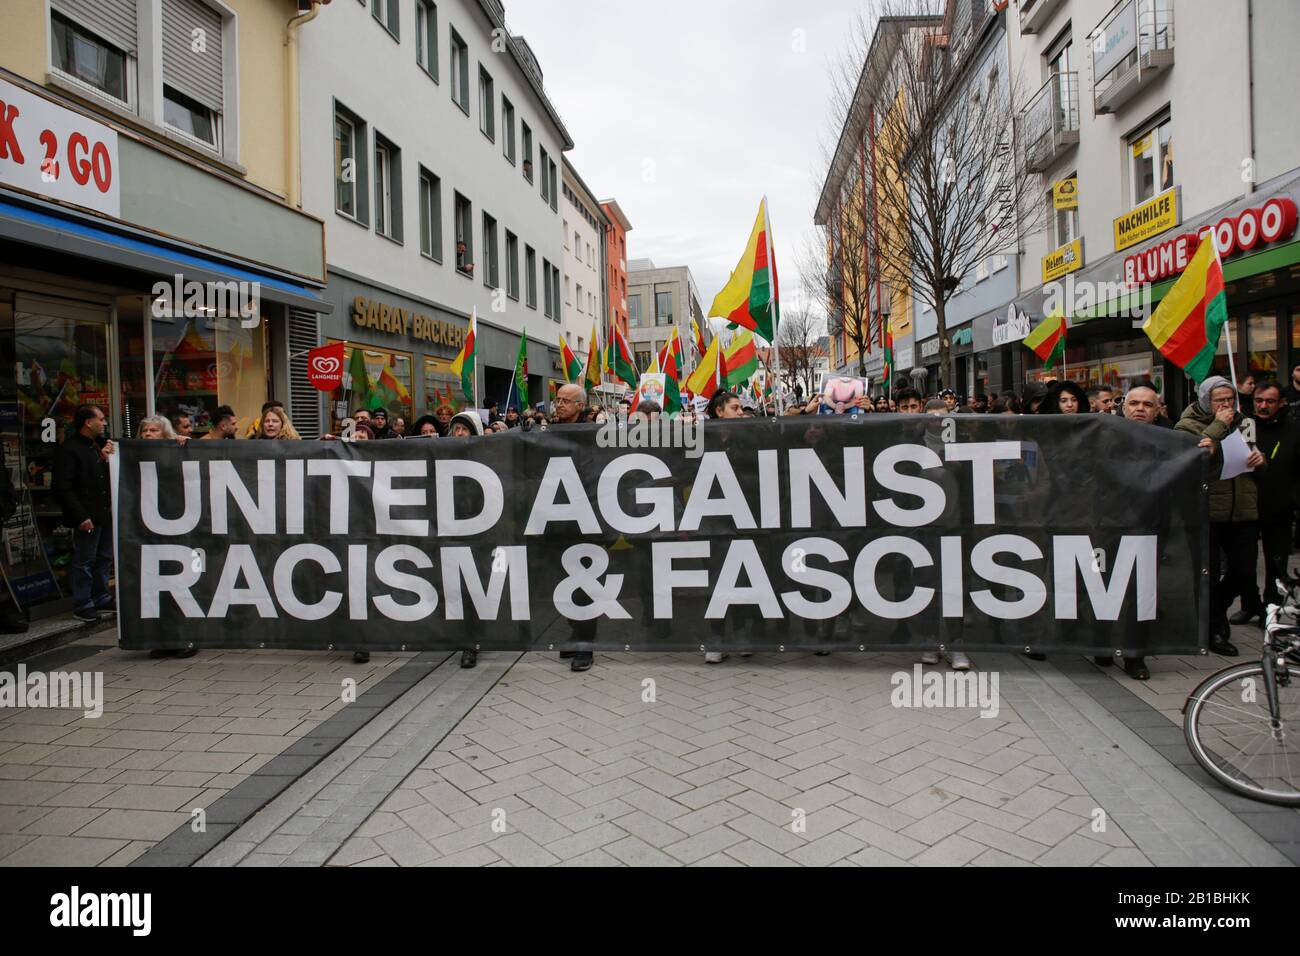 2/22/2020) Protesters hold a banner that reads 'United against Racism and Fascism'. Several thousand